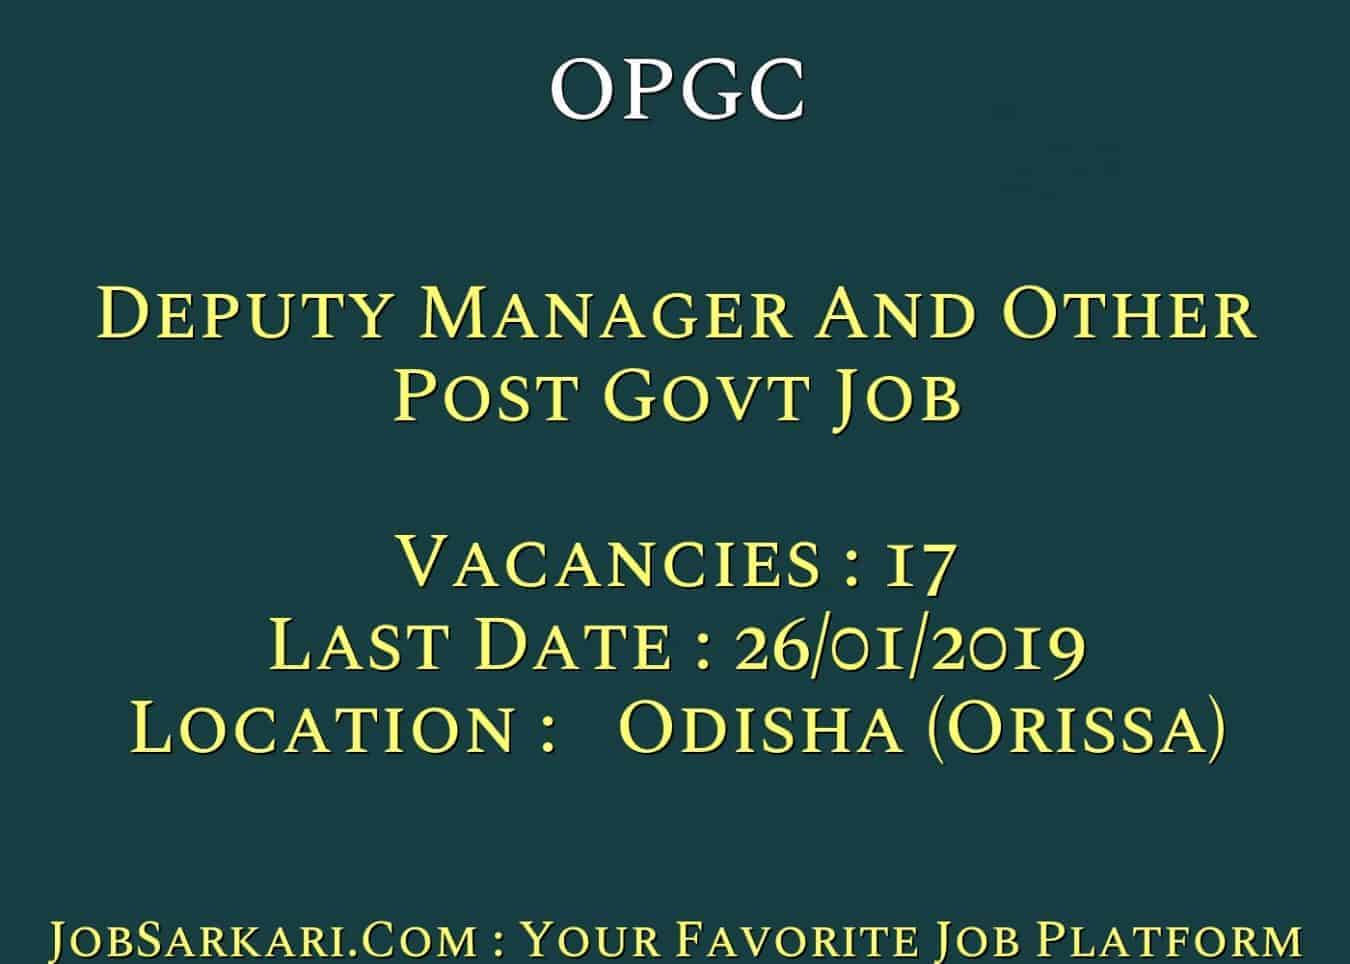 OPGC Recruitment 2019 For Deputy Manager And Other Post Govt Job